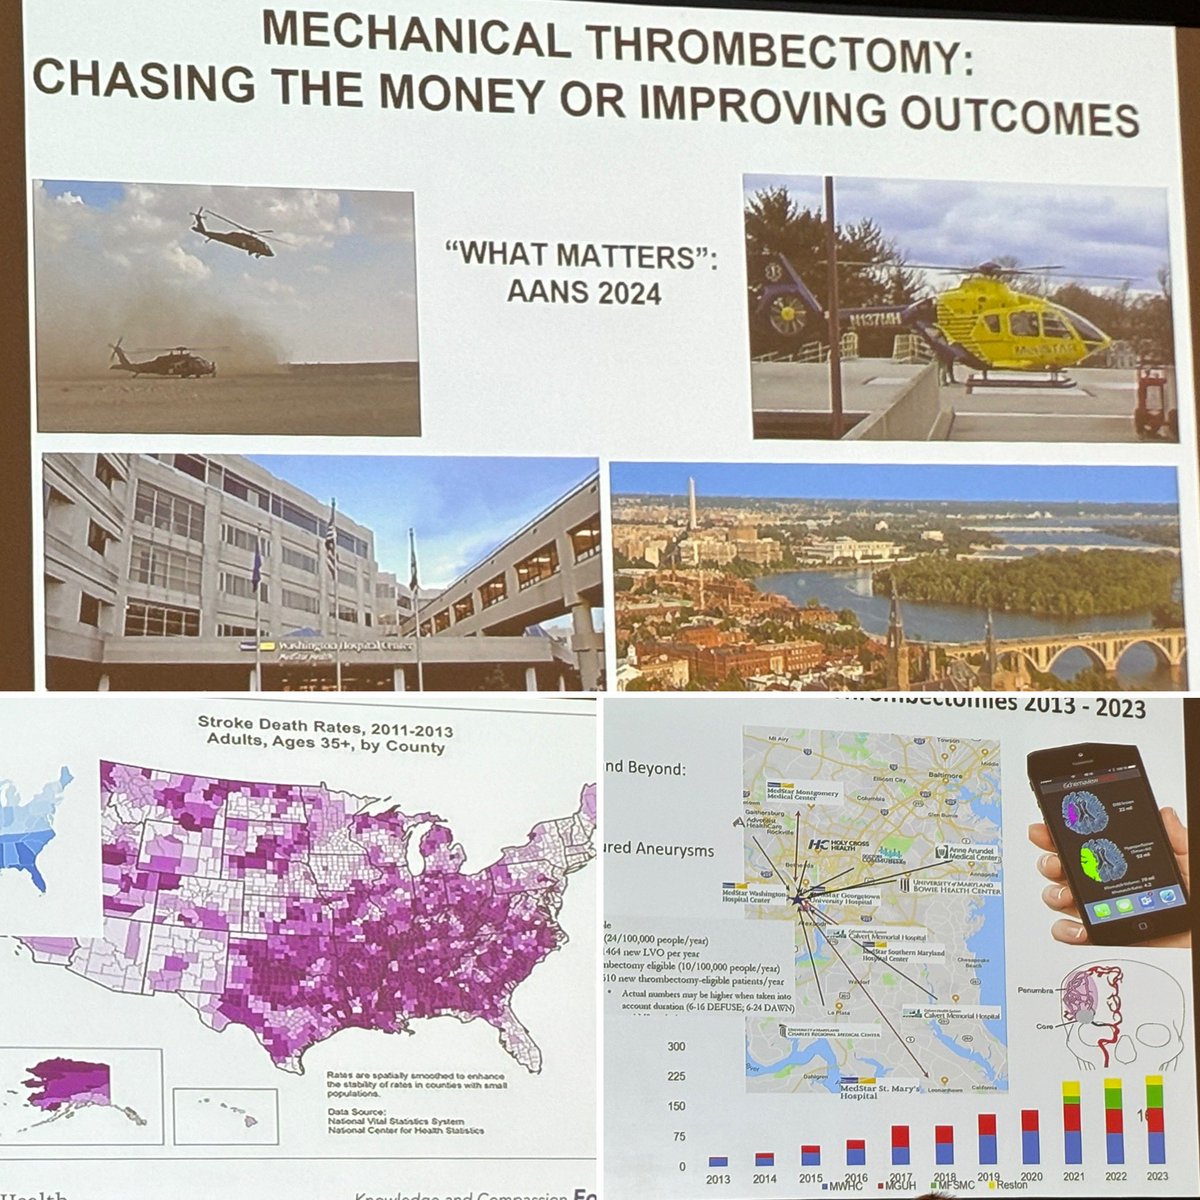 Dr. Rocco Armonda on weighing costs with clinical outcome for thrombectomy @MedStarHealth #AANS2024 #whatmatters2me @AANSNeuro @IsaacYangMD @UCLAHealth @UCLANsgy @HarborUCLA @HarborUCLASurg #skullbase